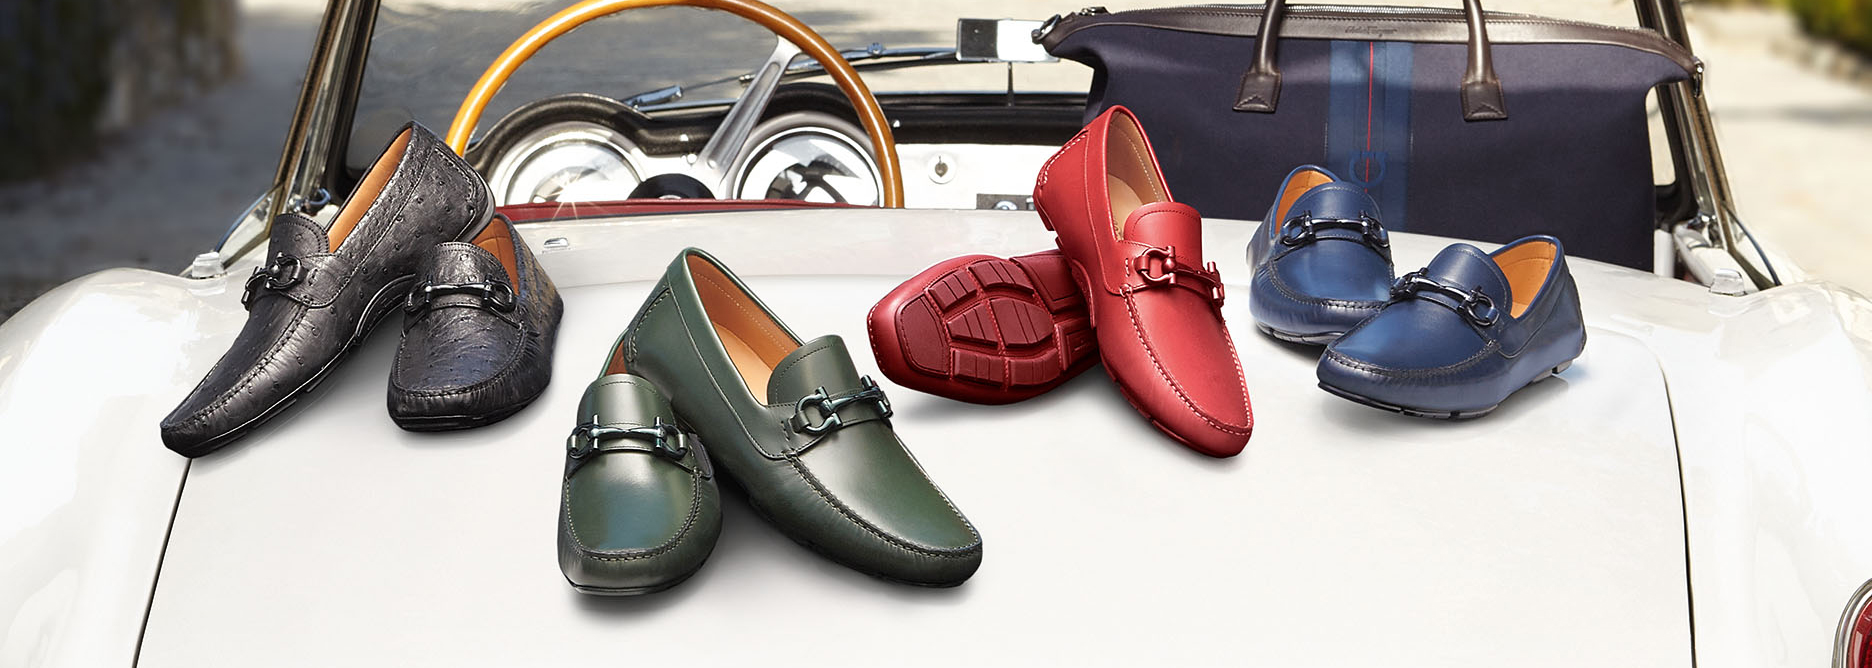 You Can Now Customize Your Ferragamo Driving Shoes to Suit Your Personal  Style - Bloomberg